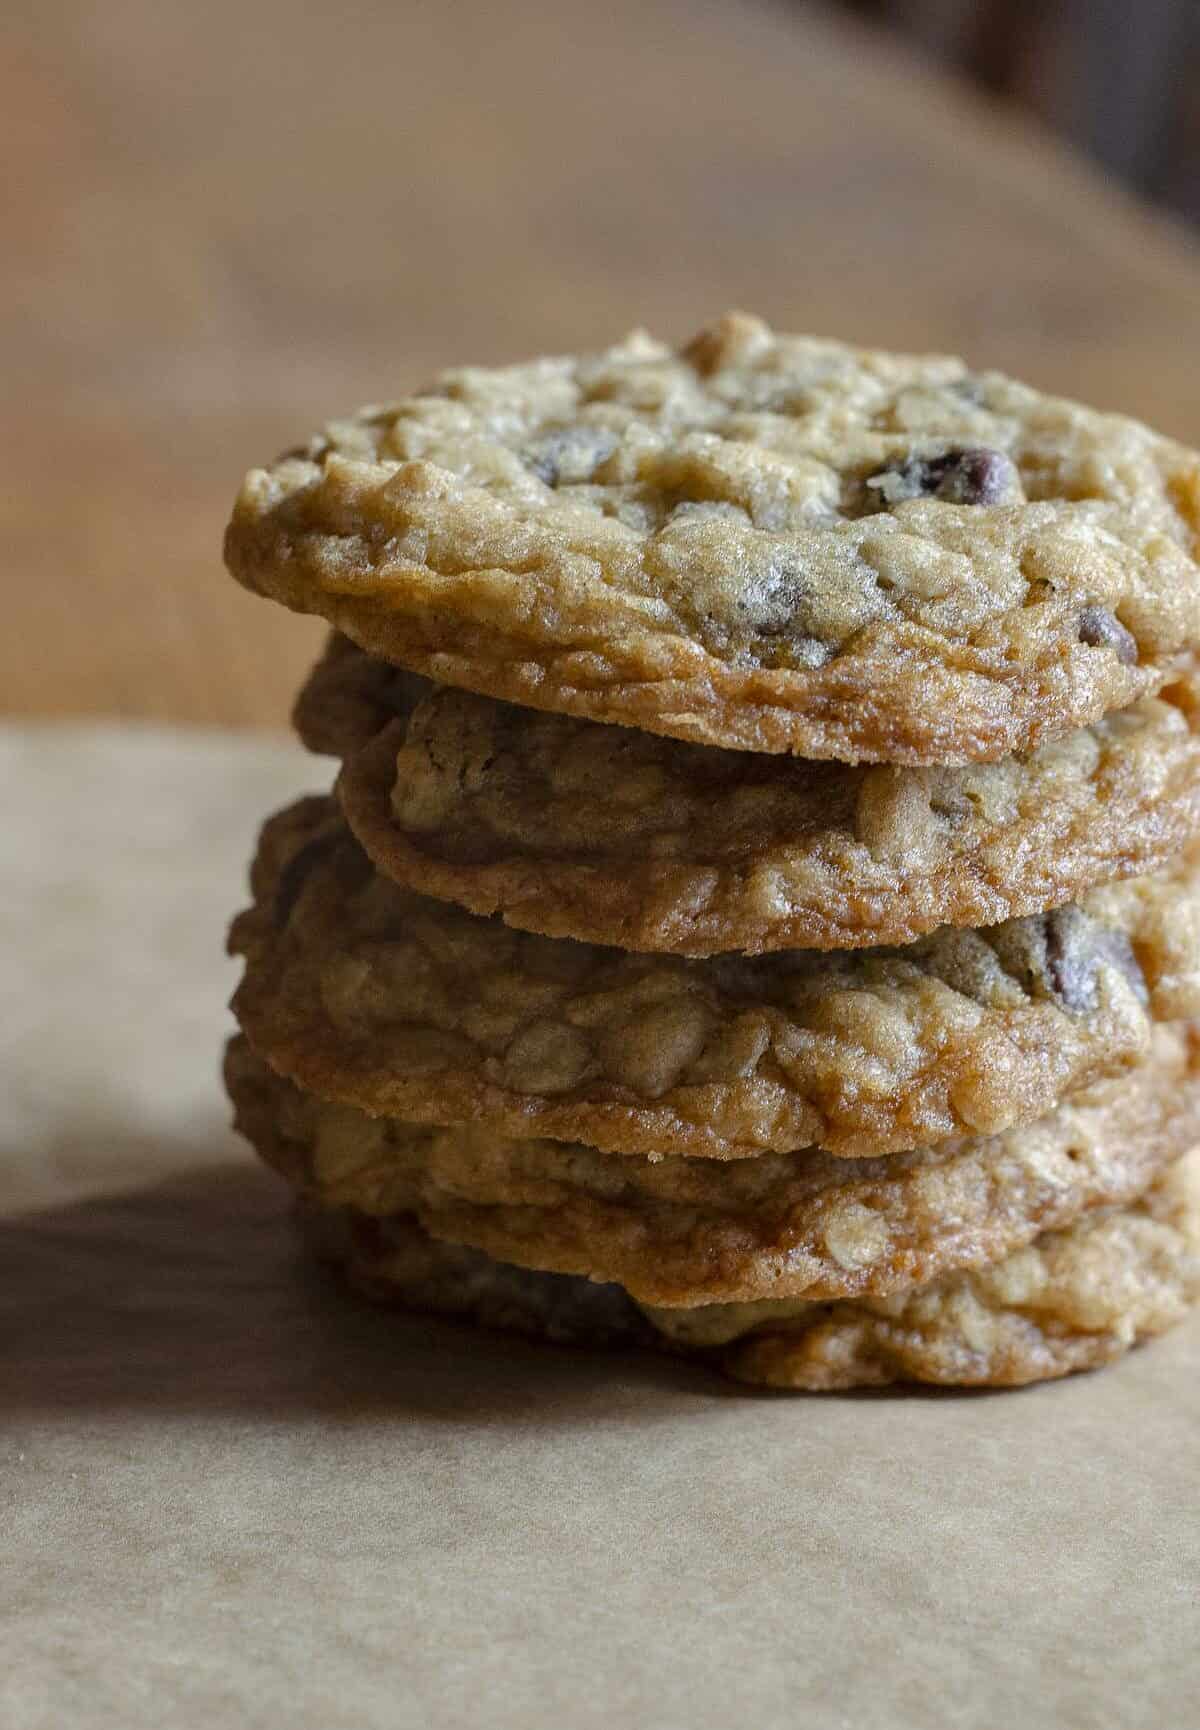  Savor the delicious aroma of freshly baked oatmeal cookies.